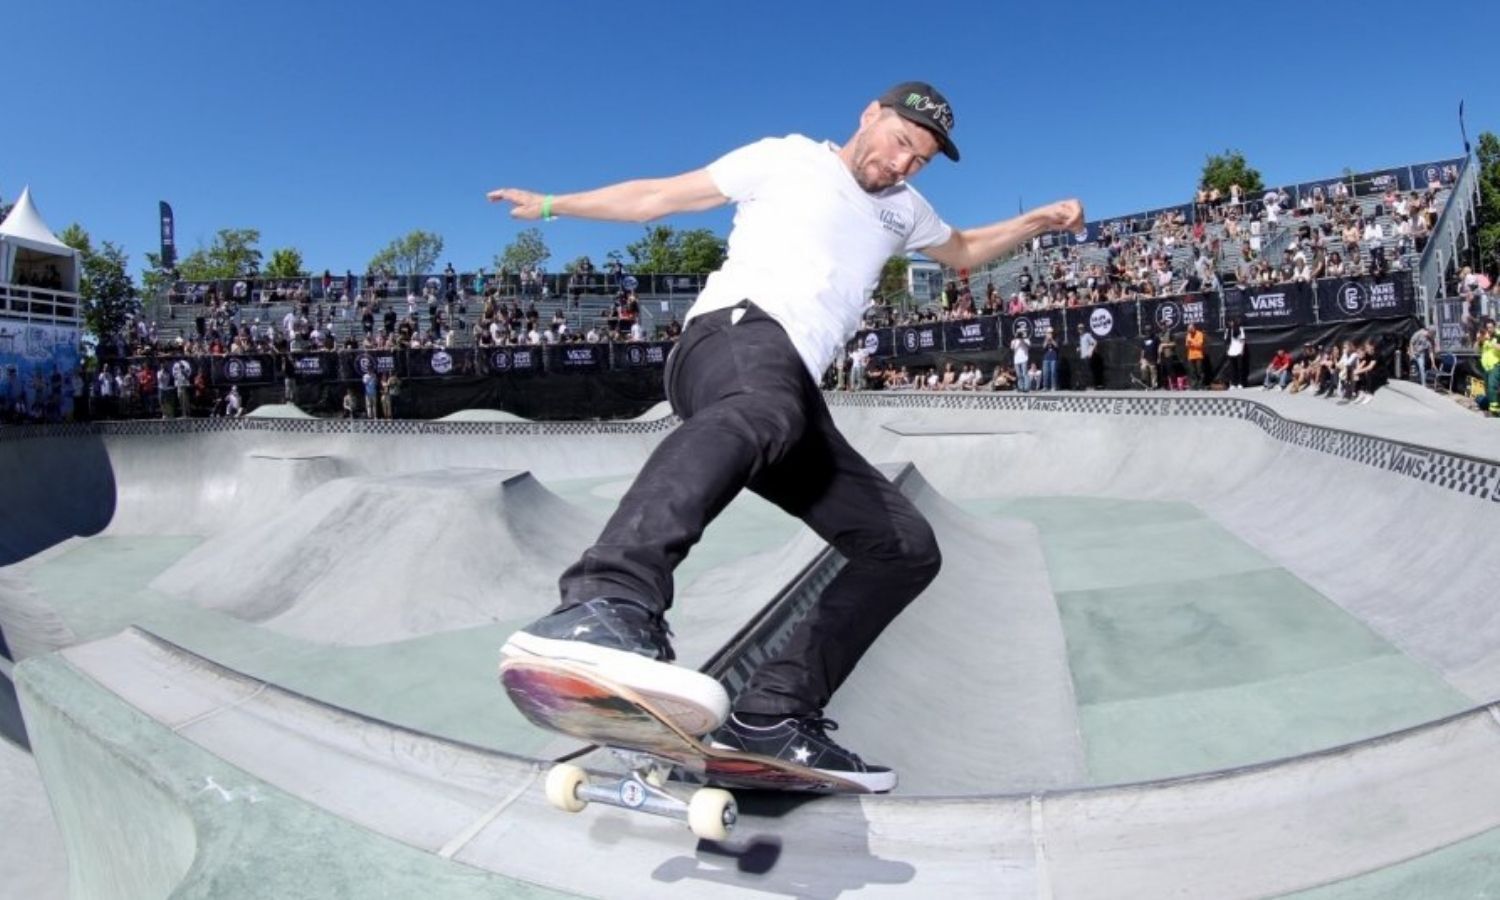 skateboarder Rune Glifberg becomes the oldest debutant at Tokyo Olympics